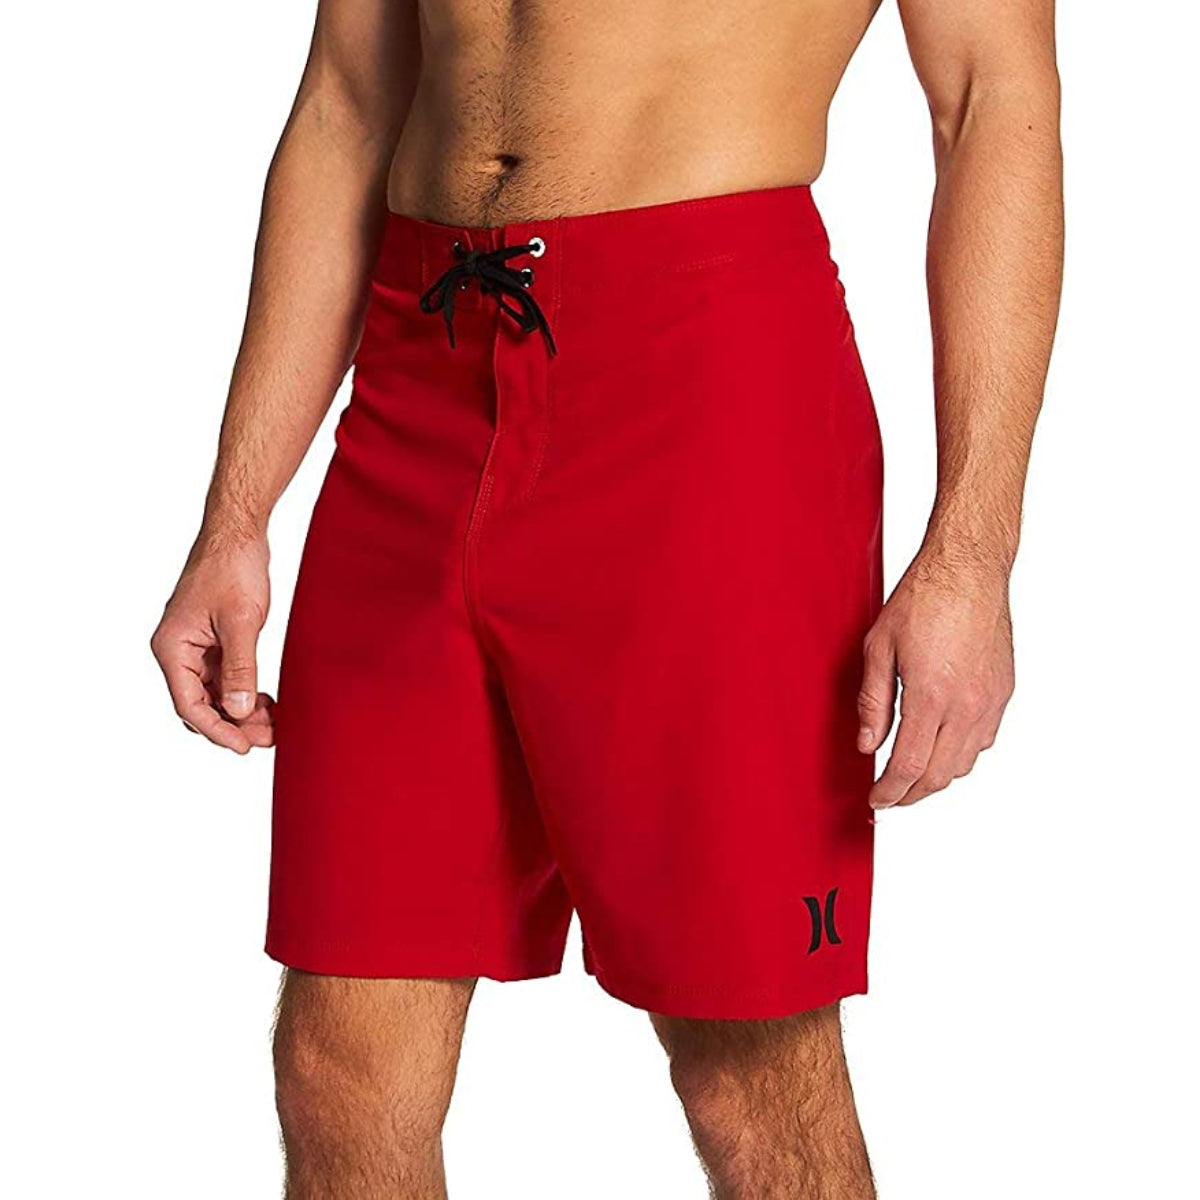 Hurley One & Only 20" Boardshort 687-GymRed 31